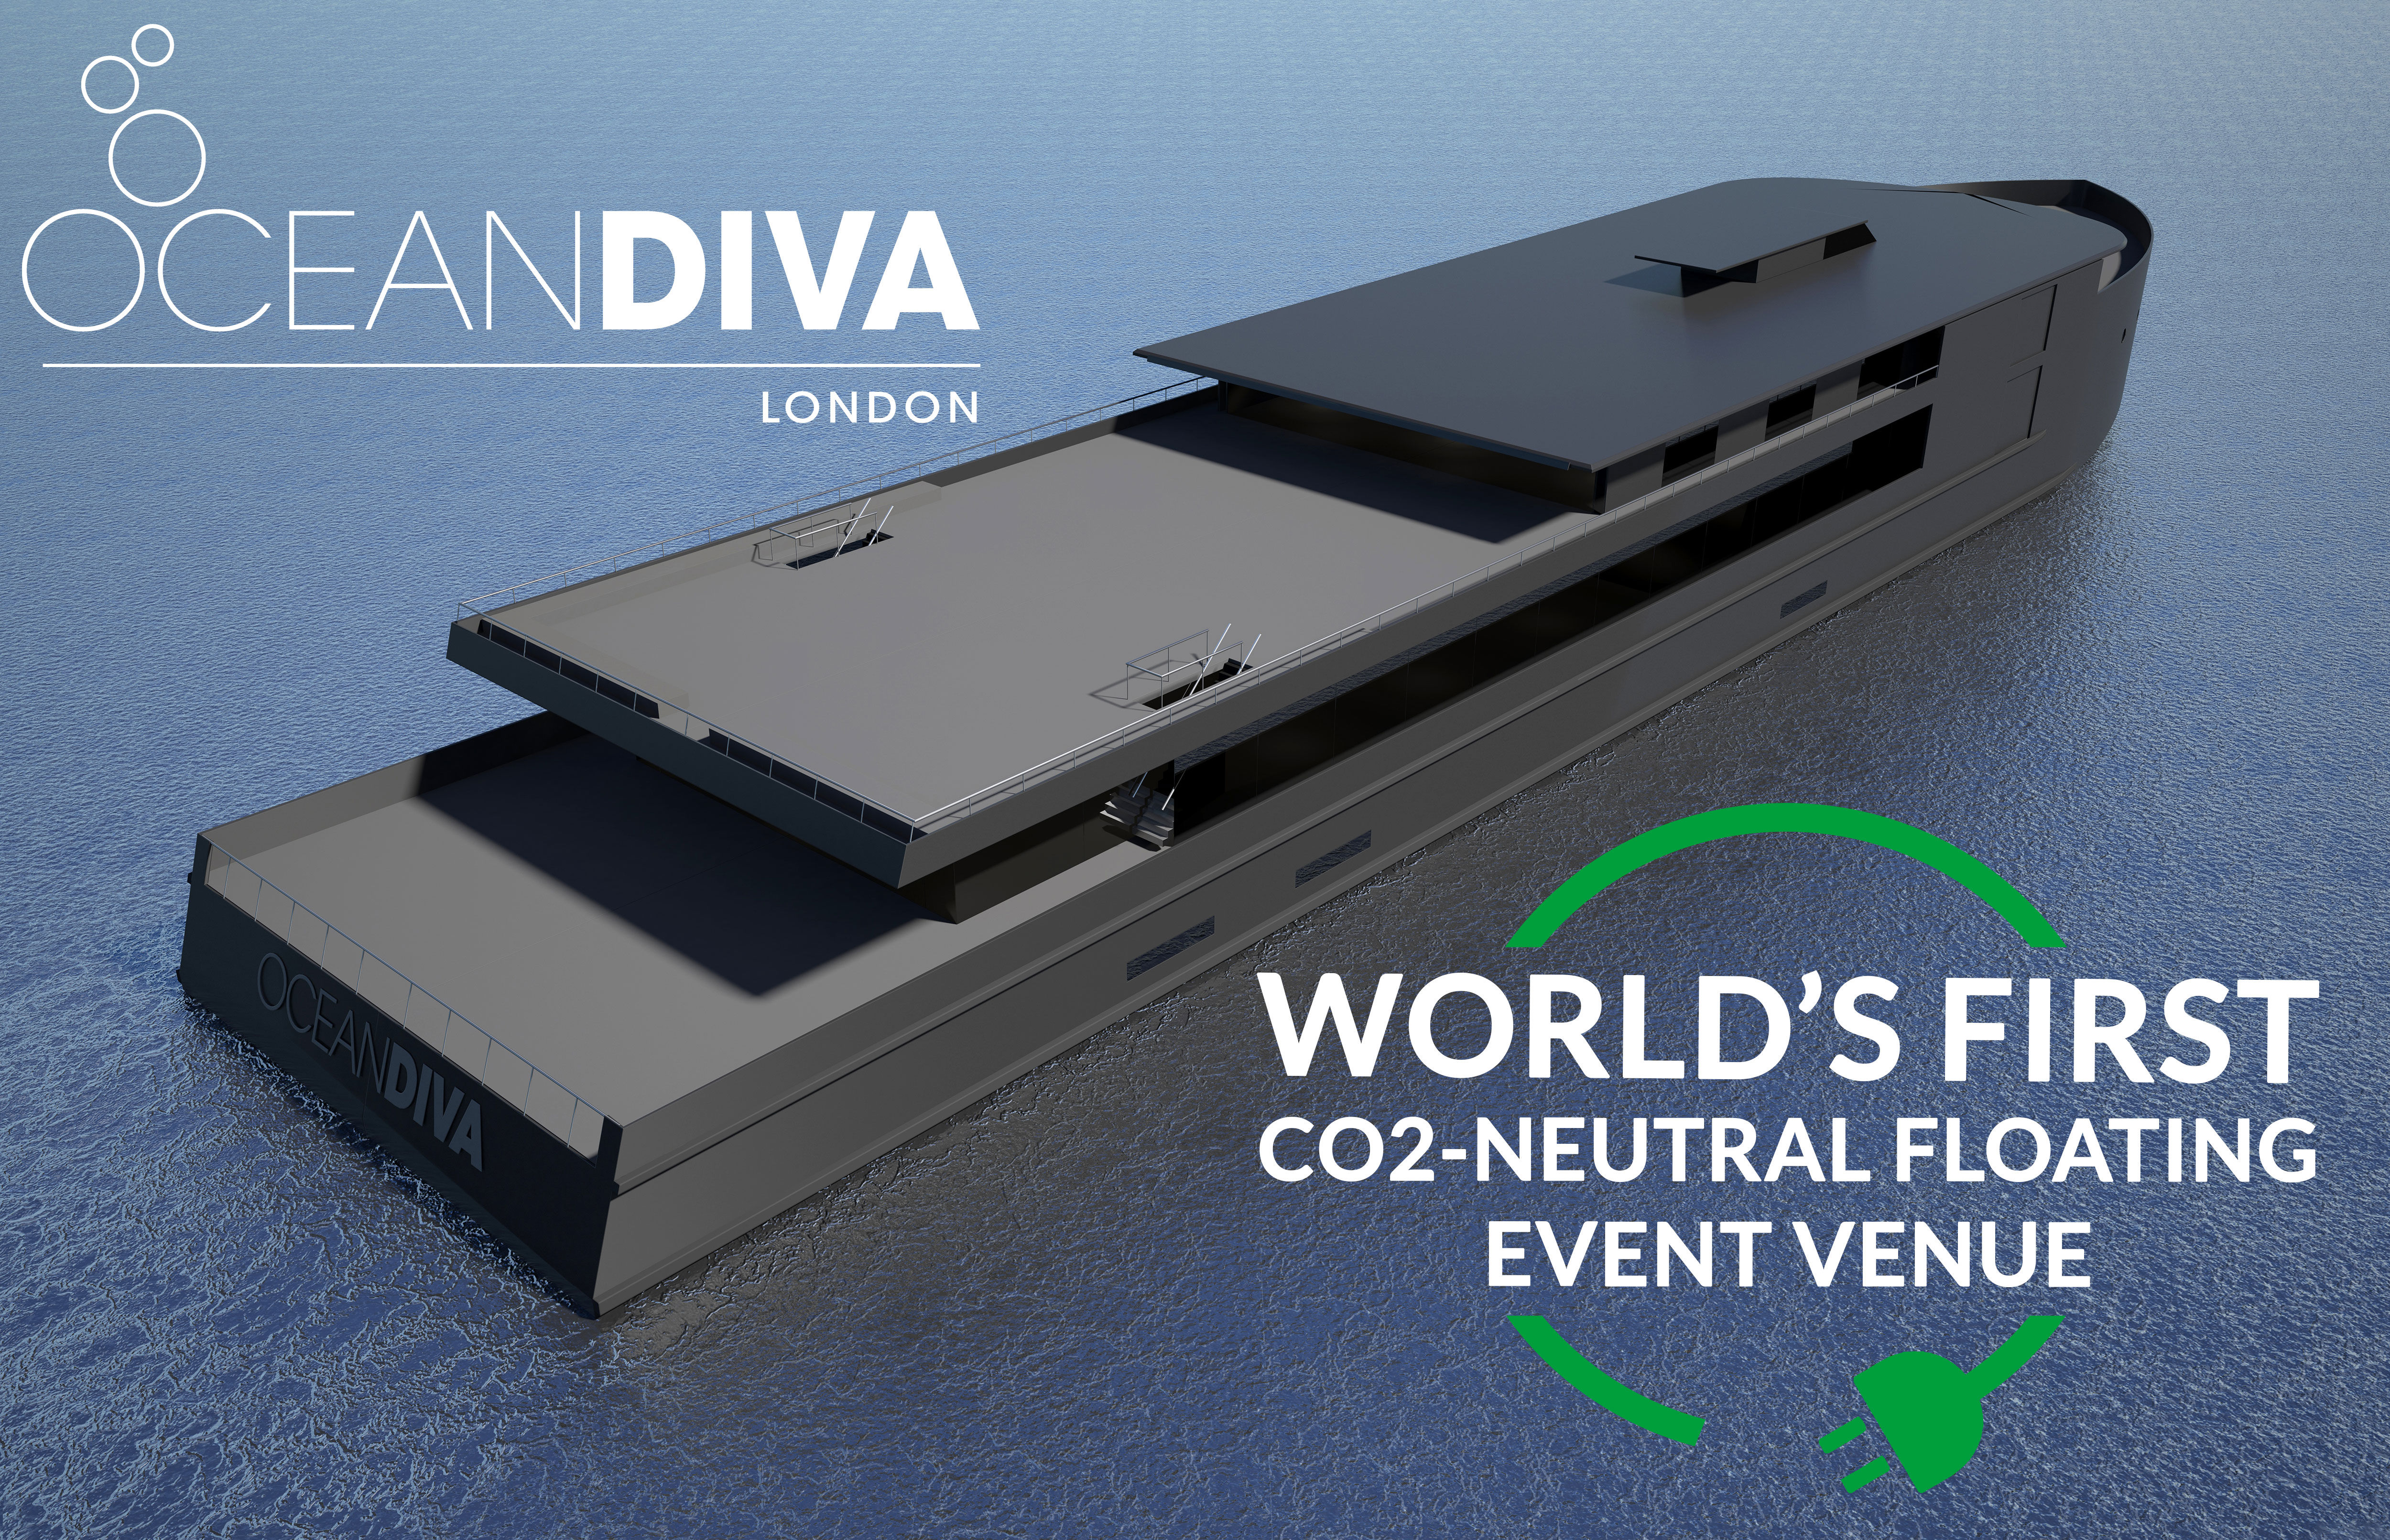 OCEANDIVA launches the world's first CO2-neutral event ship